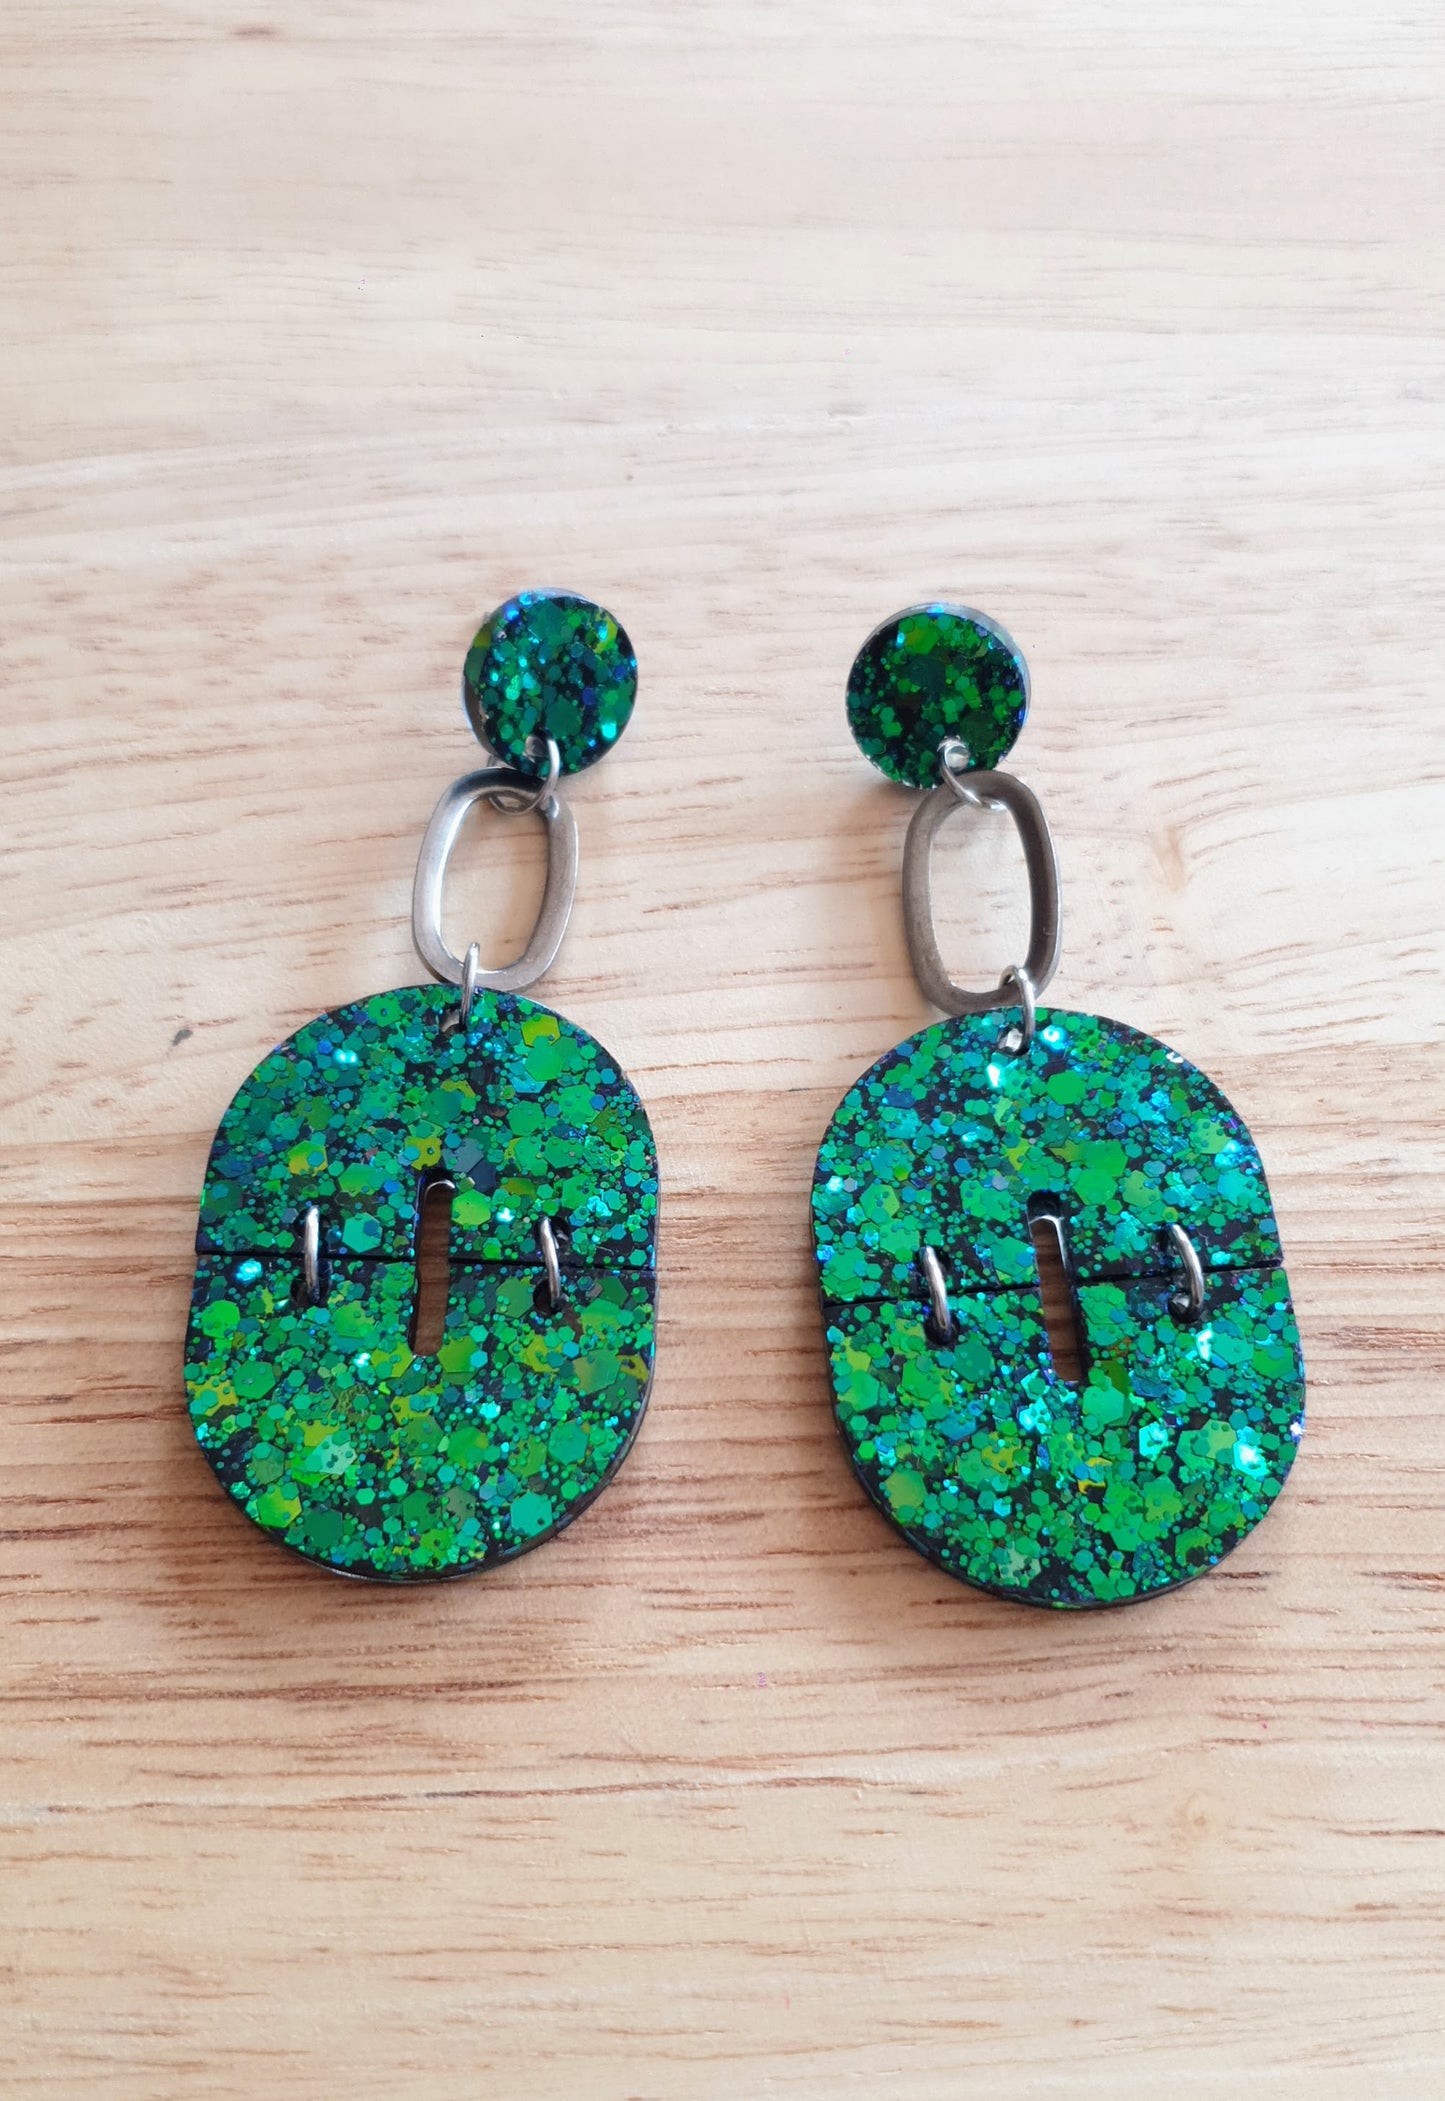 Statement Oval Arch Dangle Earrings, Chameleon Blue and Green Glitter Resin Dangles, Statement Handmade Earrings with Stainless Steel